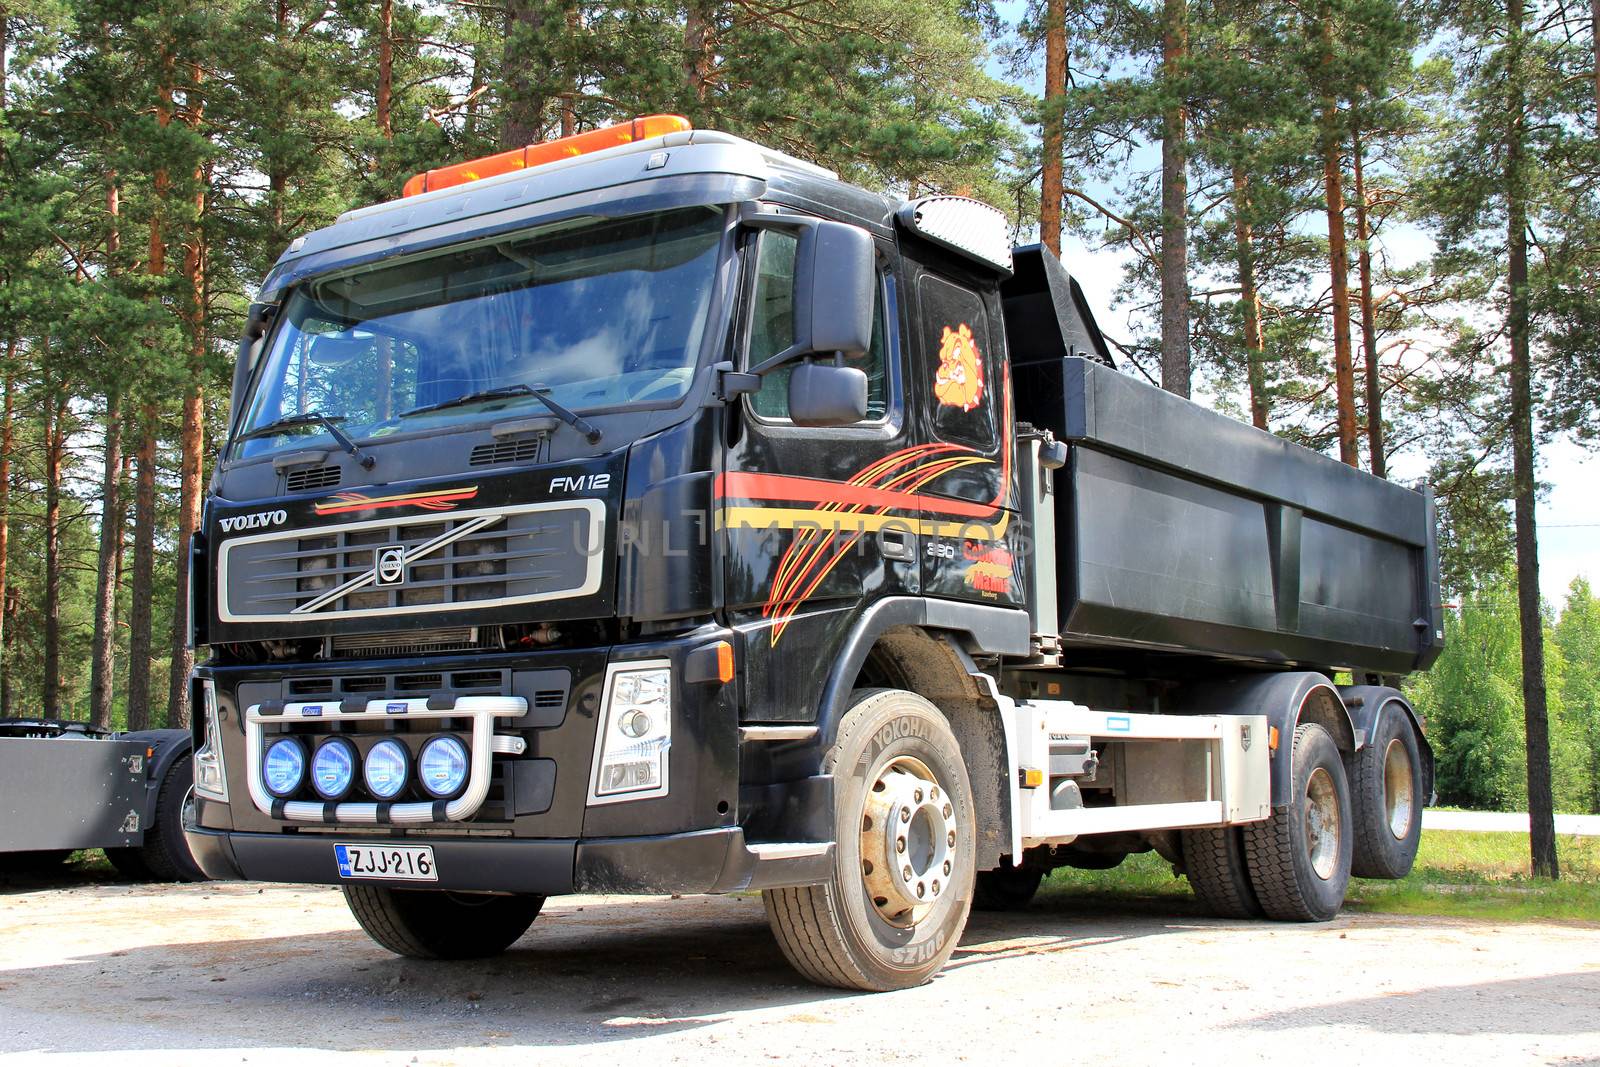 TAMMISAARI, FINLAND - JULY 6, 2013: Volvo FM12 heavy duty lorry parked in Tammisaari, Finland on July 6, 2013. D13K460 is Volvo's first engine to fulfil the demands of new Euro 6 emission regulation coming into force in 2014.